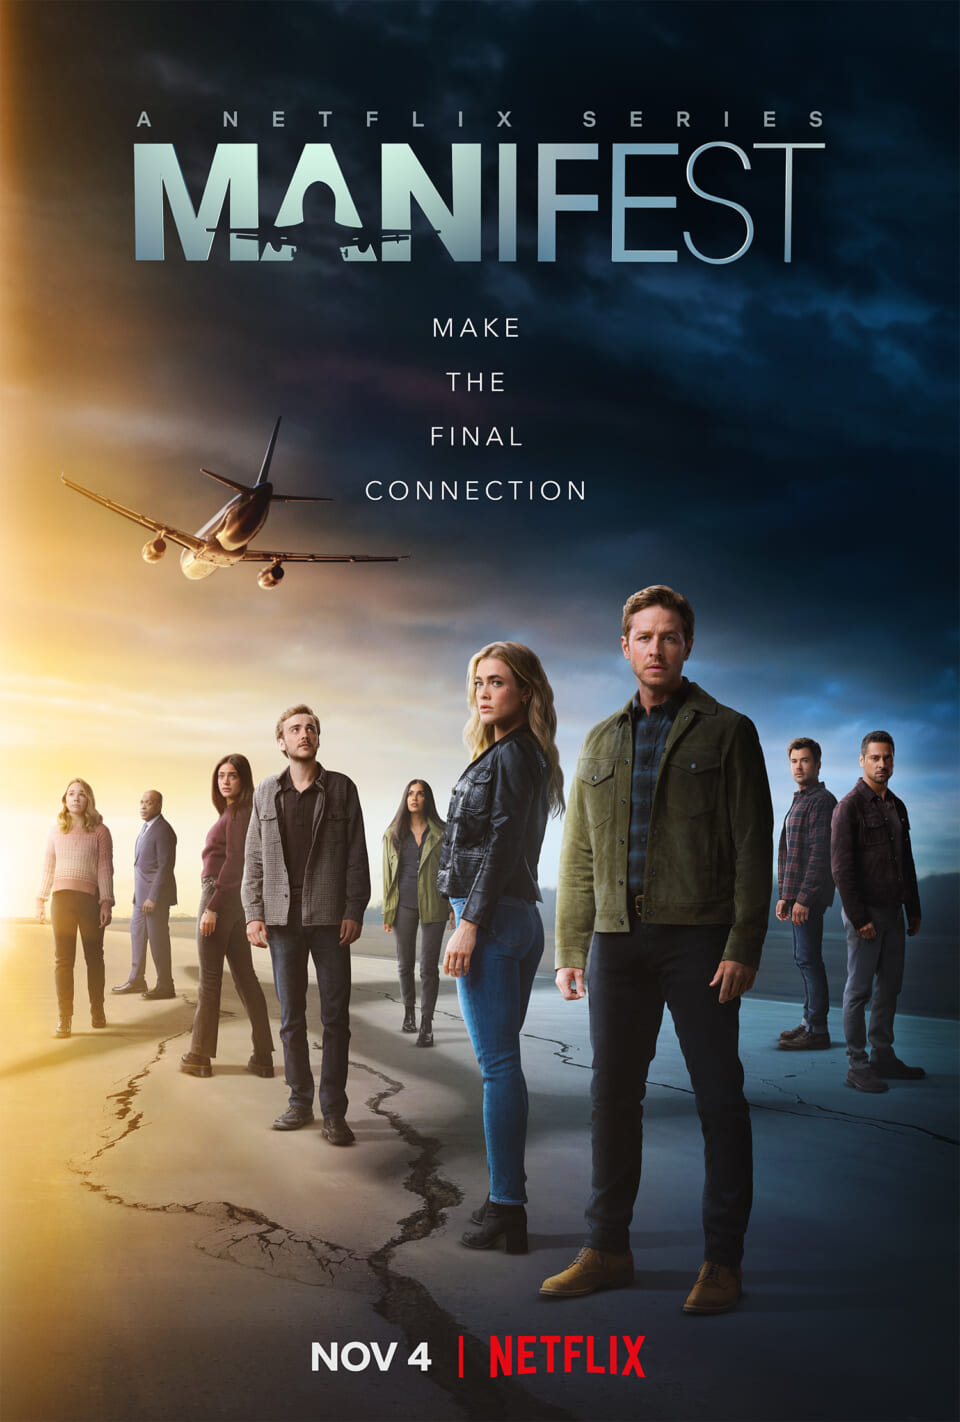 EN US Manifest S4 Main Vertical 27x40 RGB PRE 960x1422 - Stephen King On Netflix Finally Reviving This Mysterious Series: "It's like being reunited with old friends"